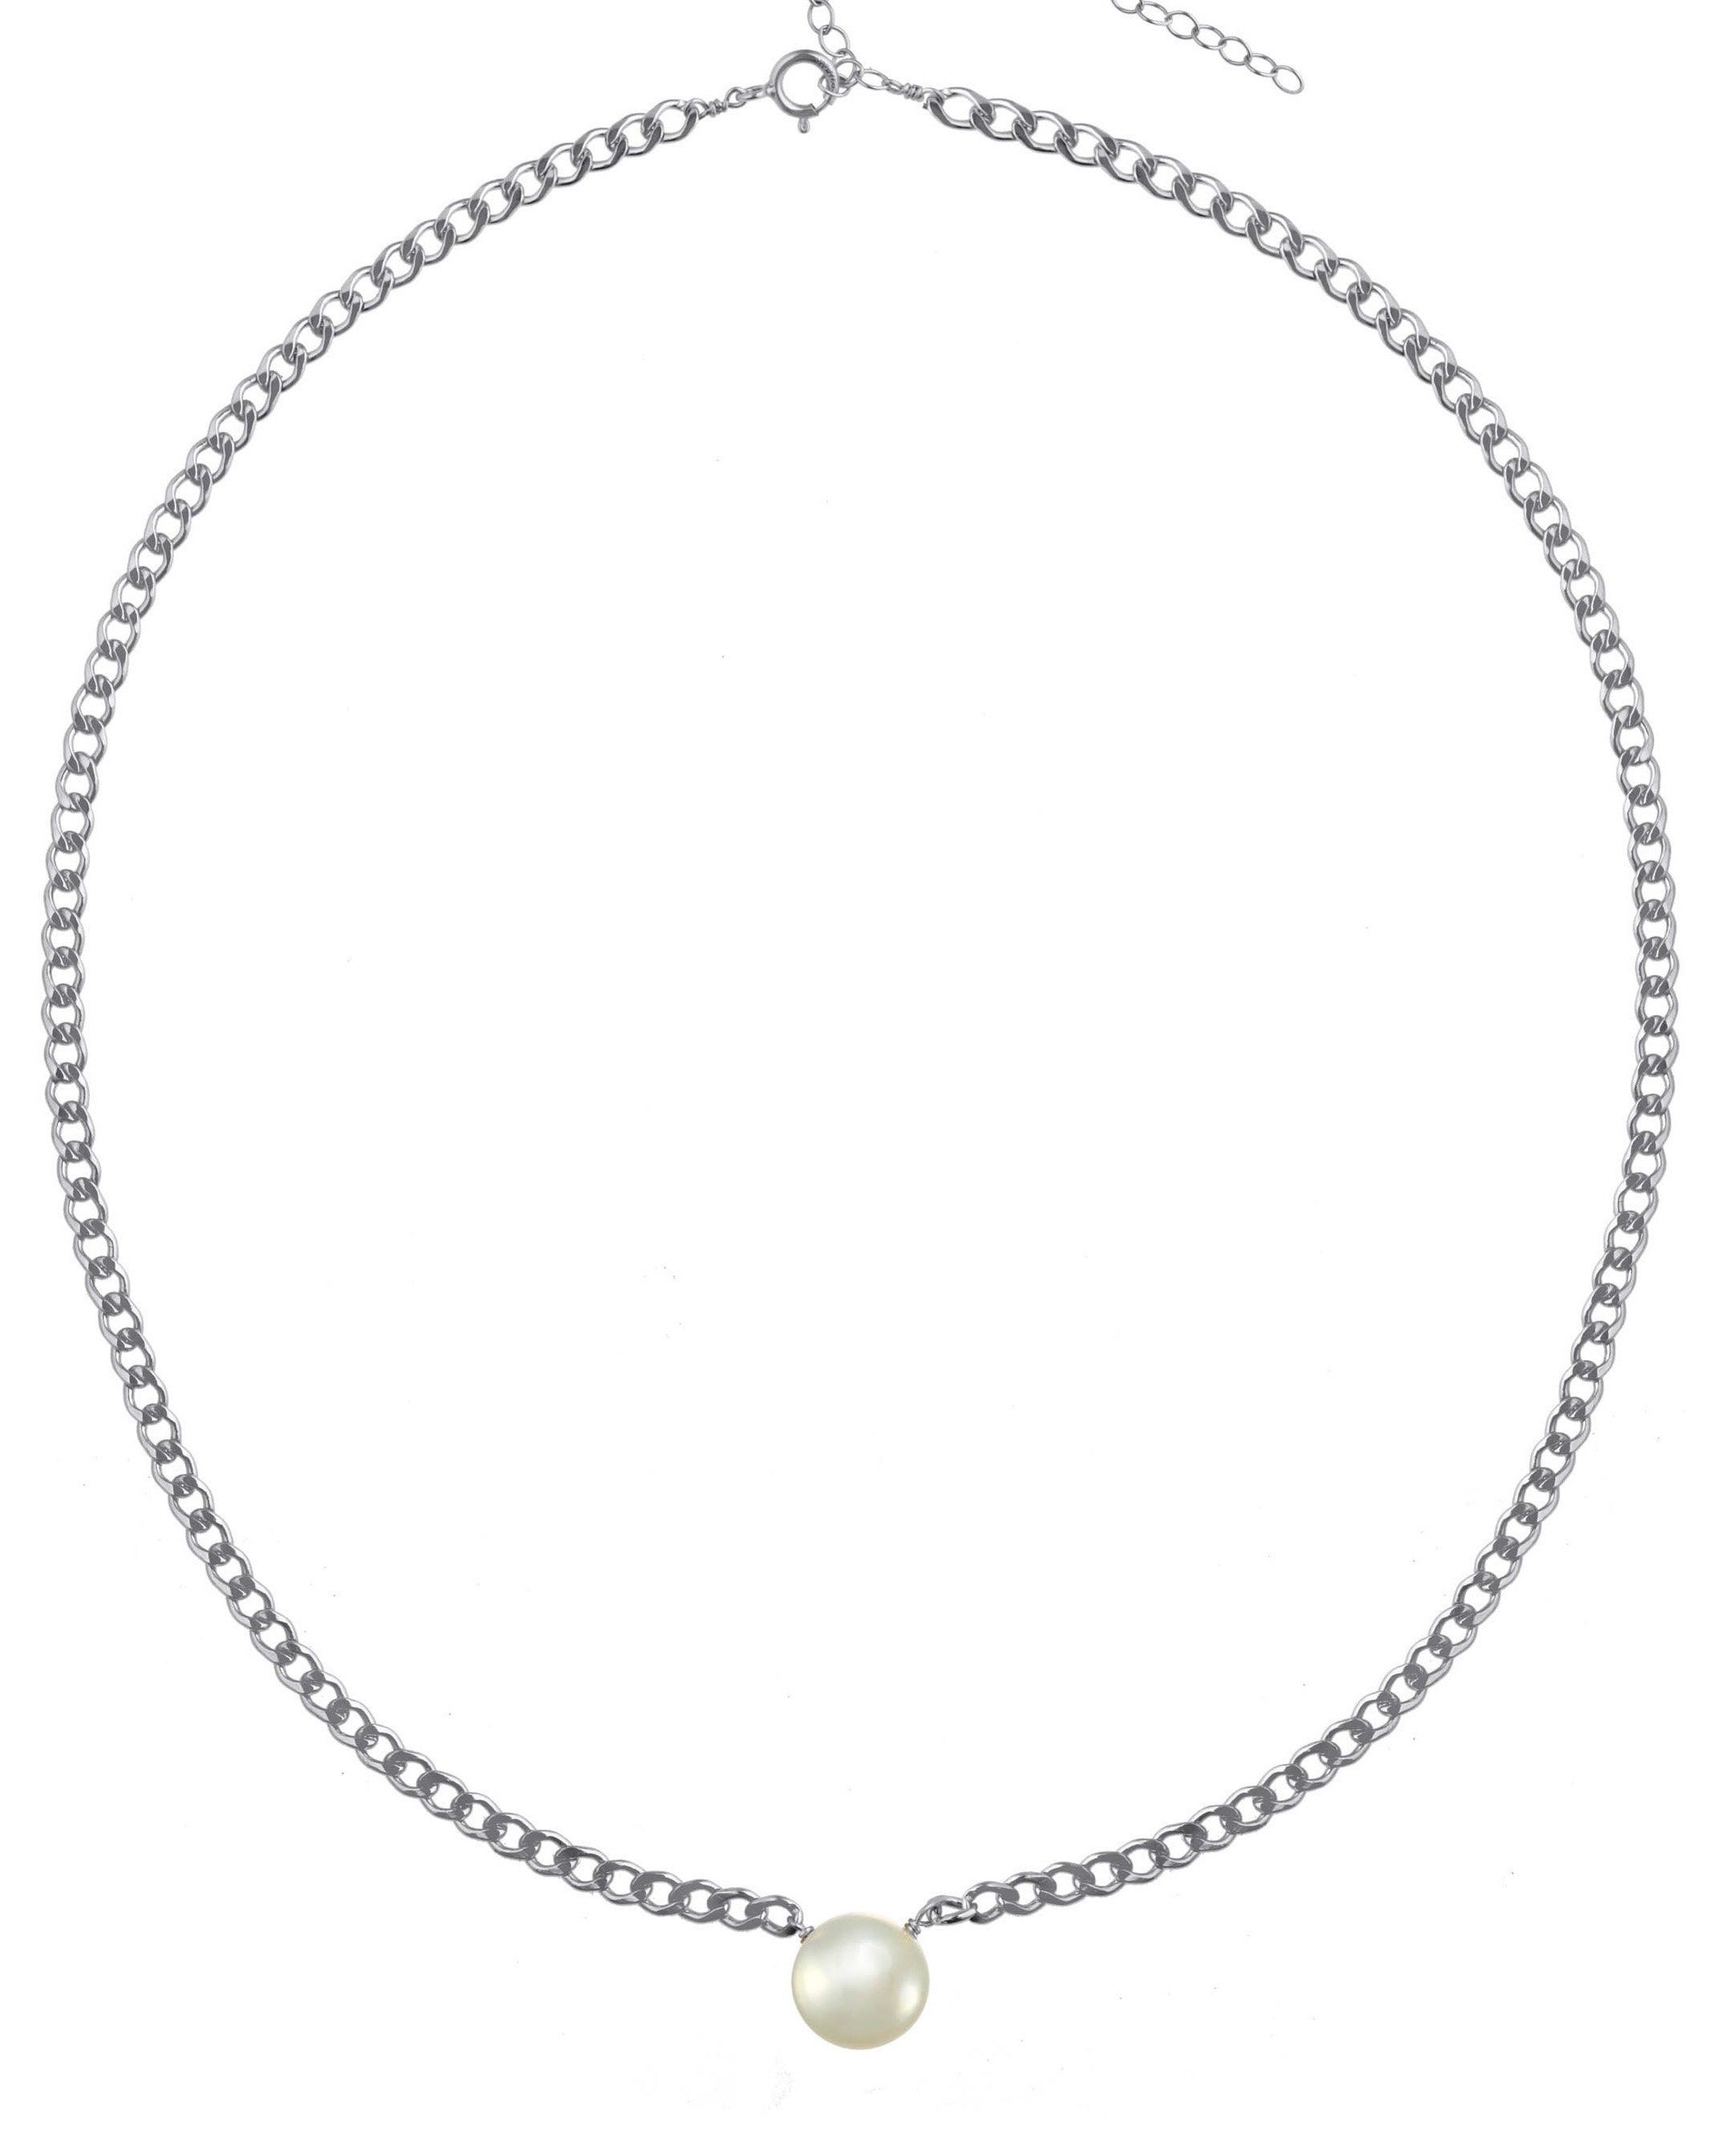 Harper Necklace by KOZAKH. A 16 to 18 inch adjustable length braided chain necklace in Sterling Silver, featuring a flat backed Freshwater Pearl.